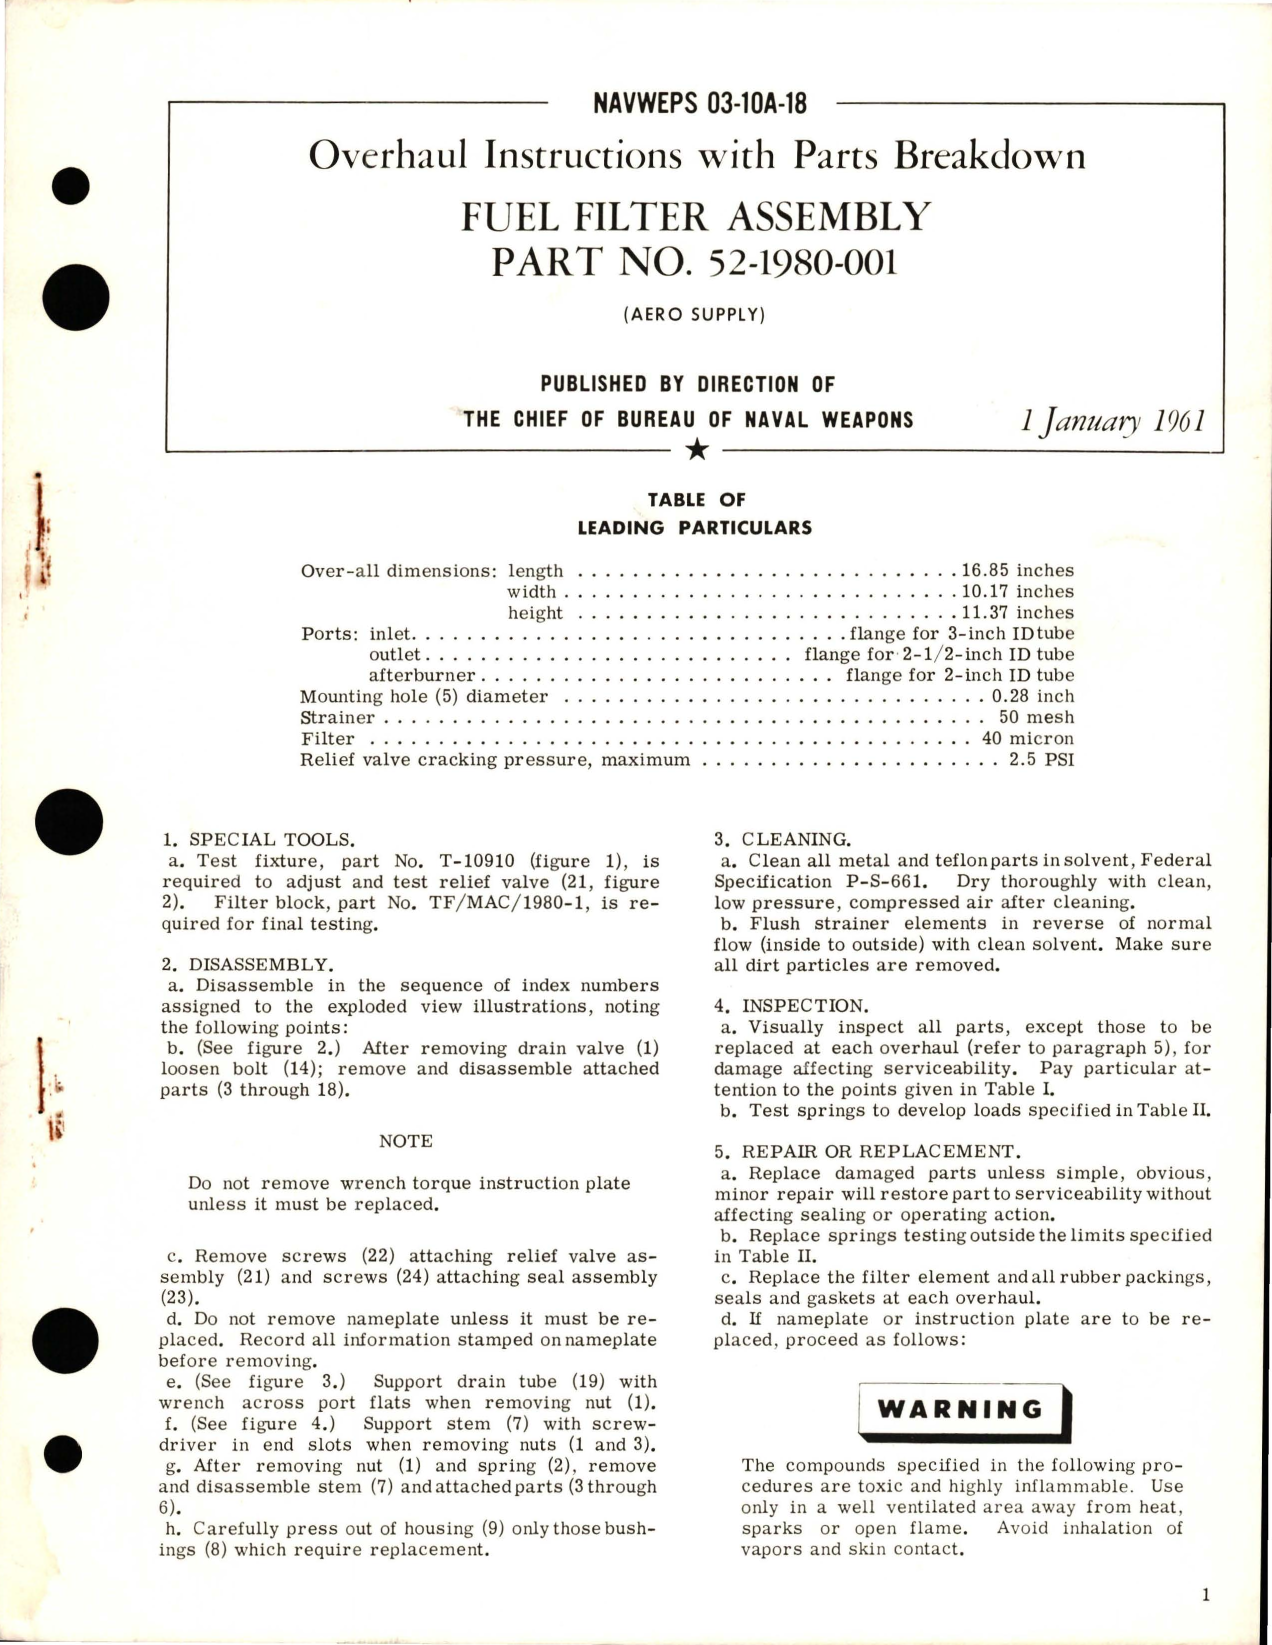 Sample page 1 from AirCorps Library document: Overhaul Instructions with Parts Breakdown for Fuel Filter Assembly - Part 52-1980-001